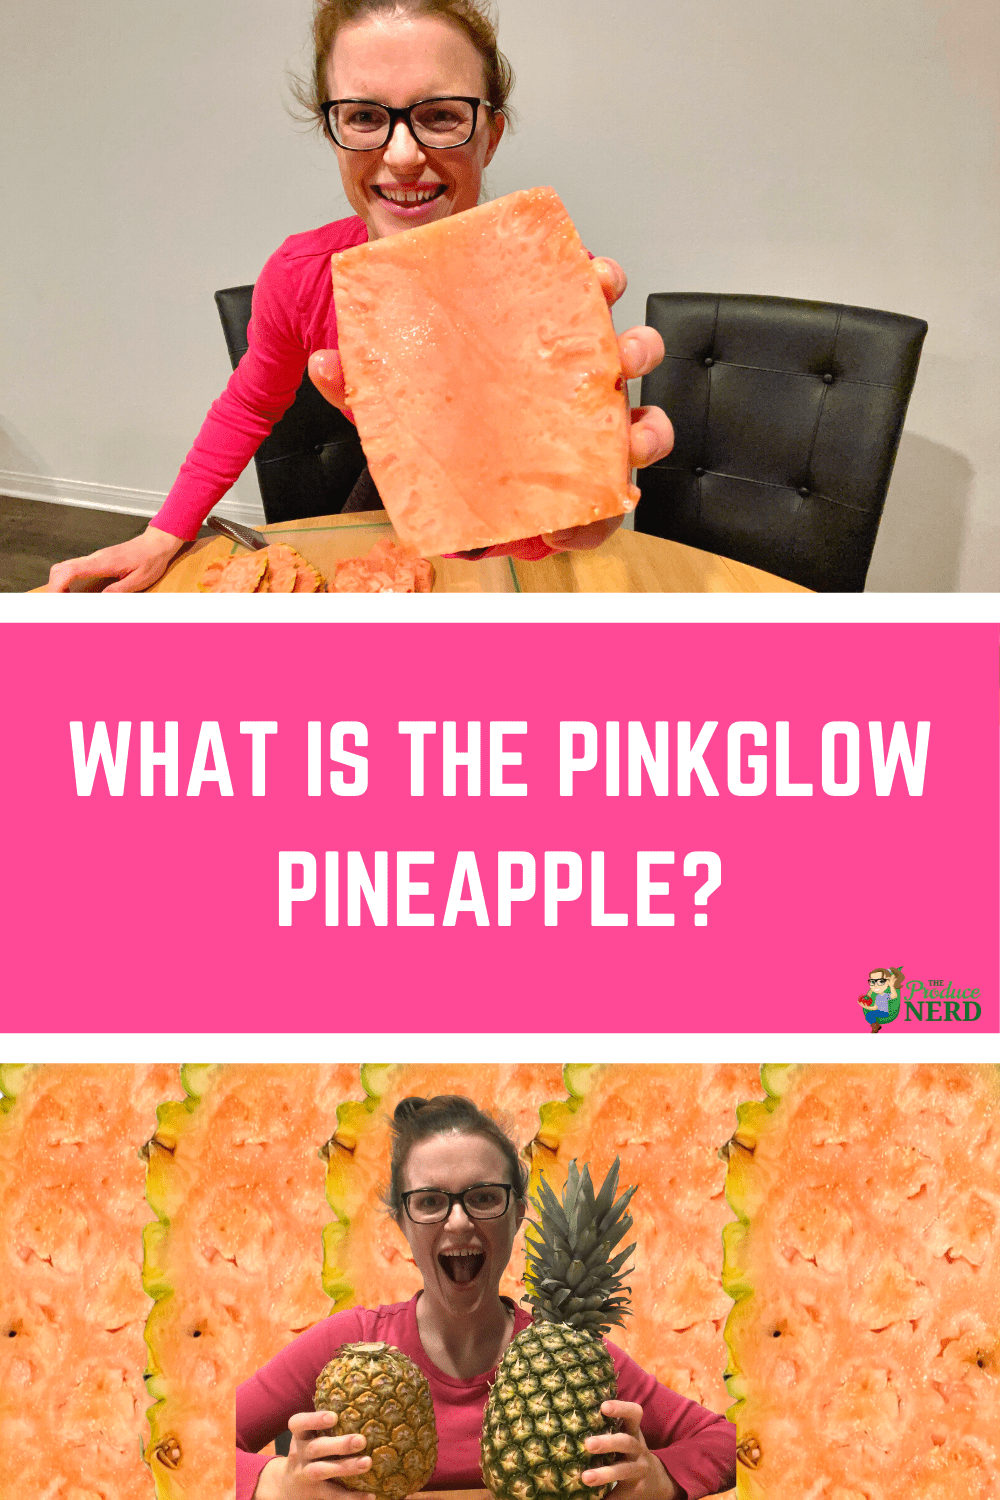 You are currently viewing Pinkglow Pineapple Review: Is the Pink Pineapple Worth it?